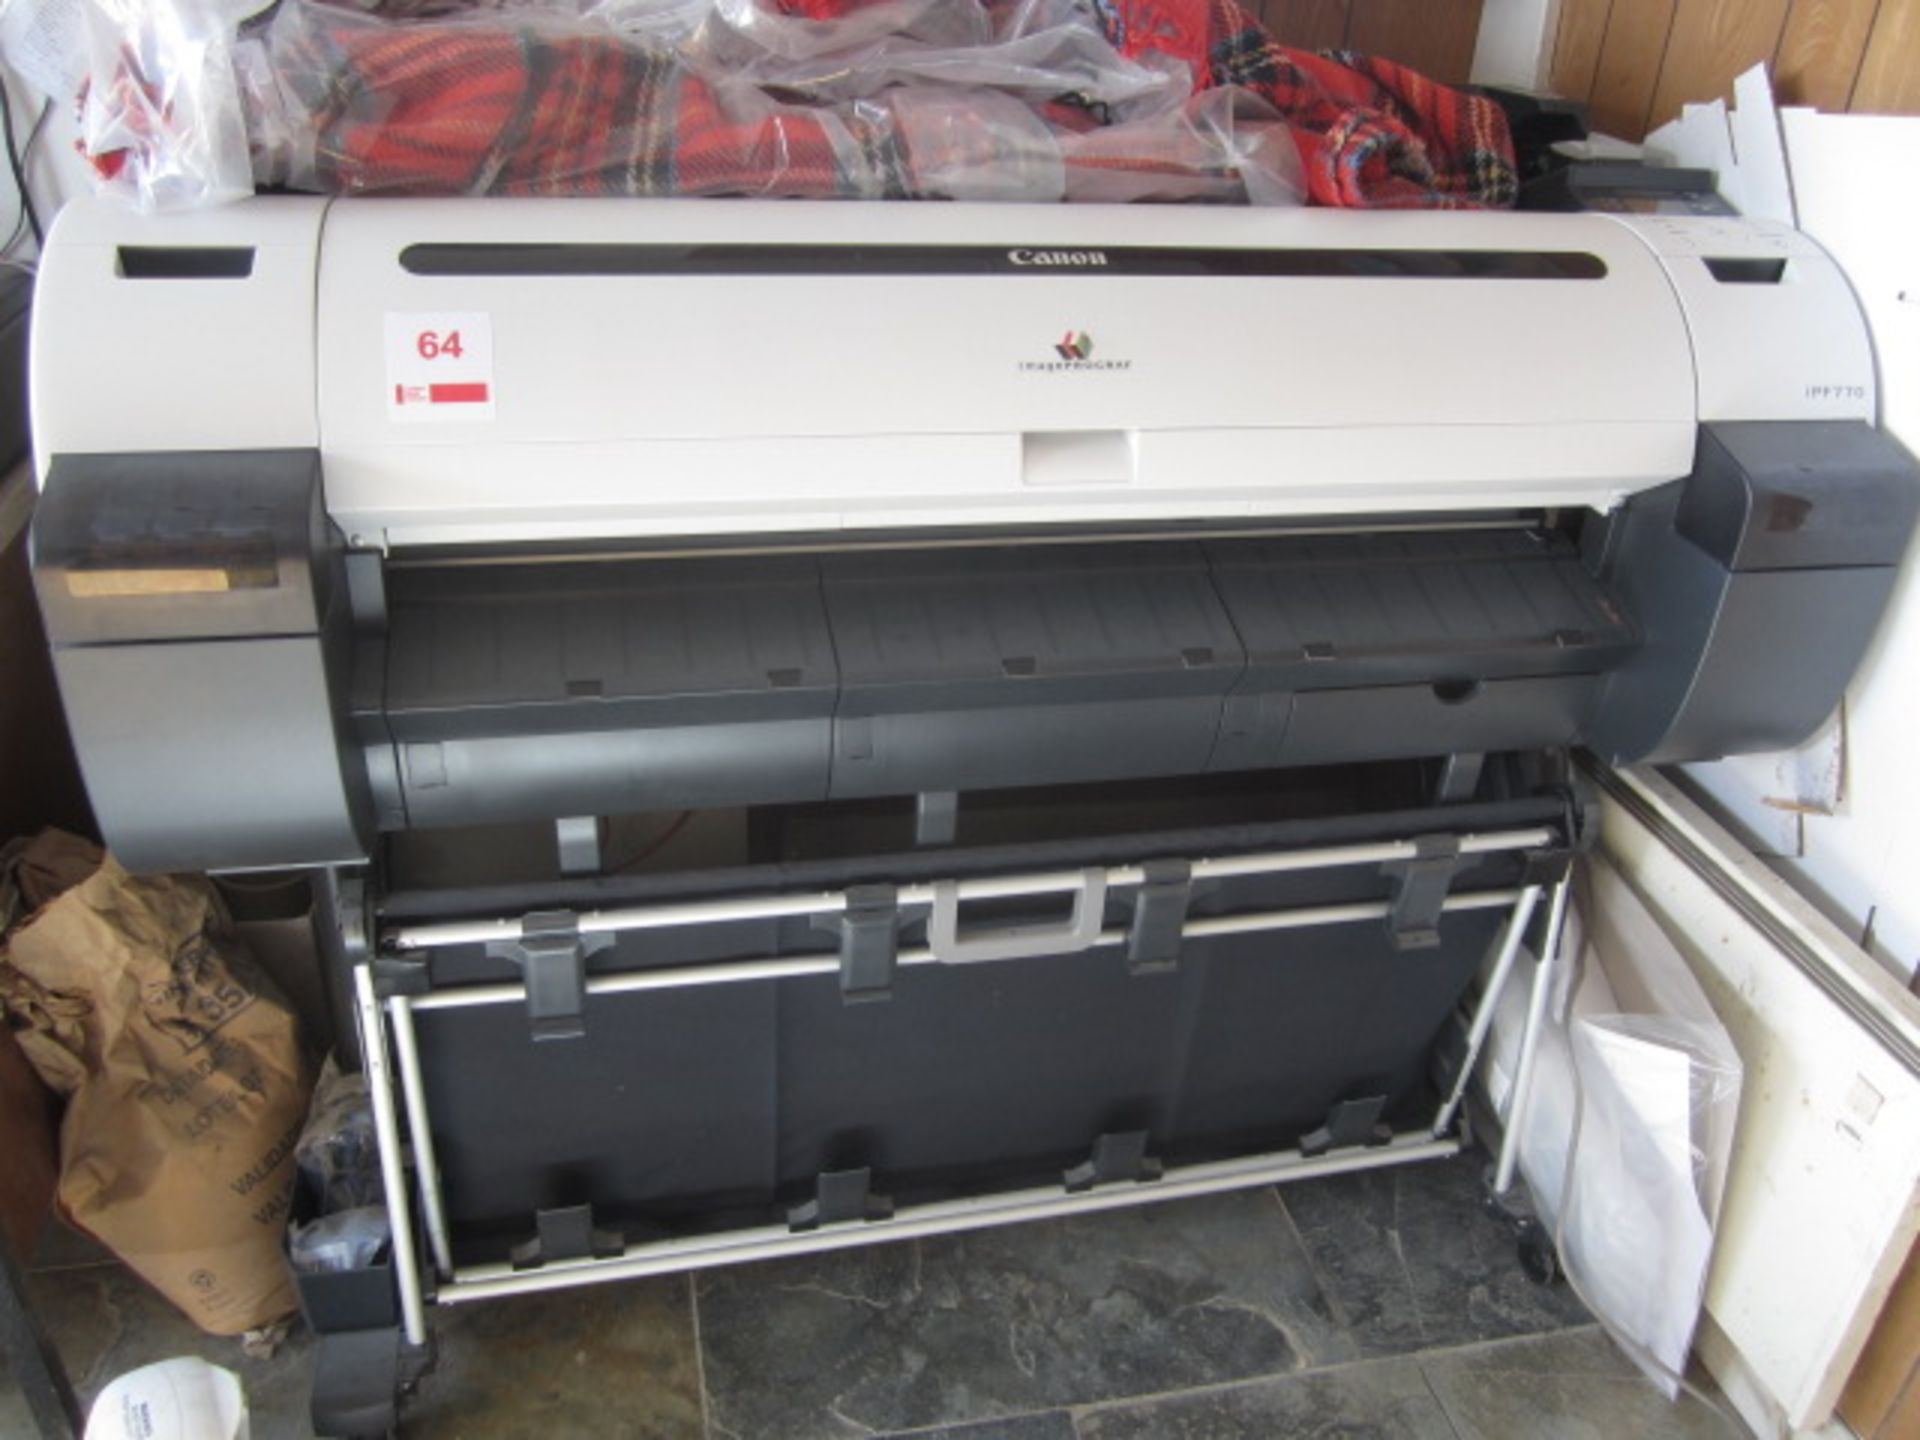 Canon iPF770 wide carriage printer